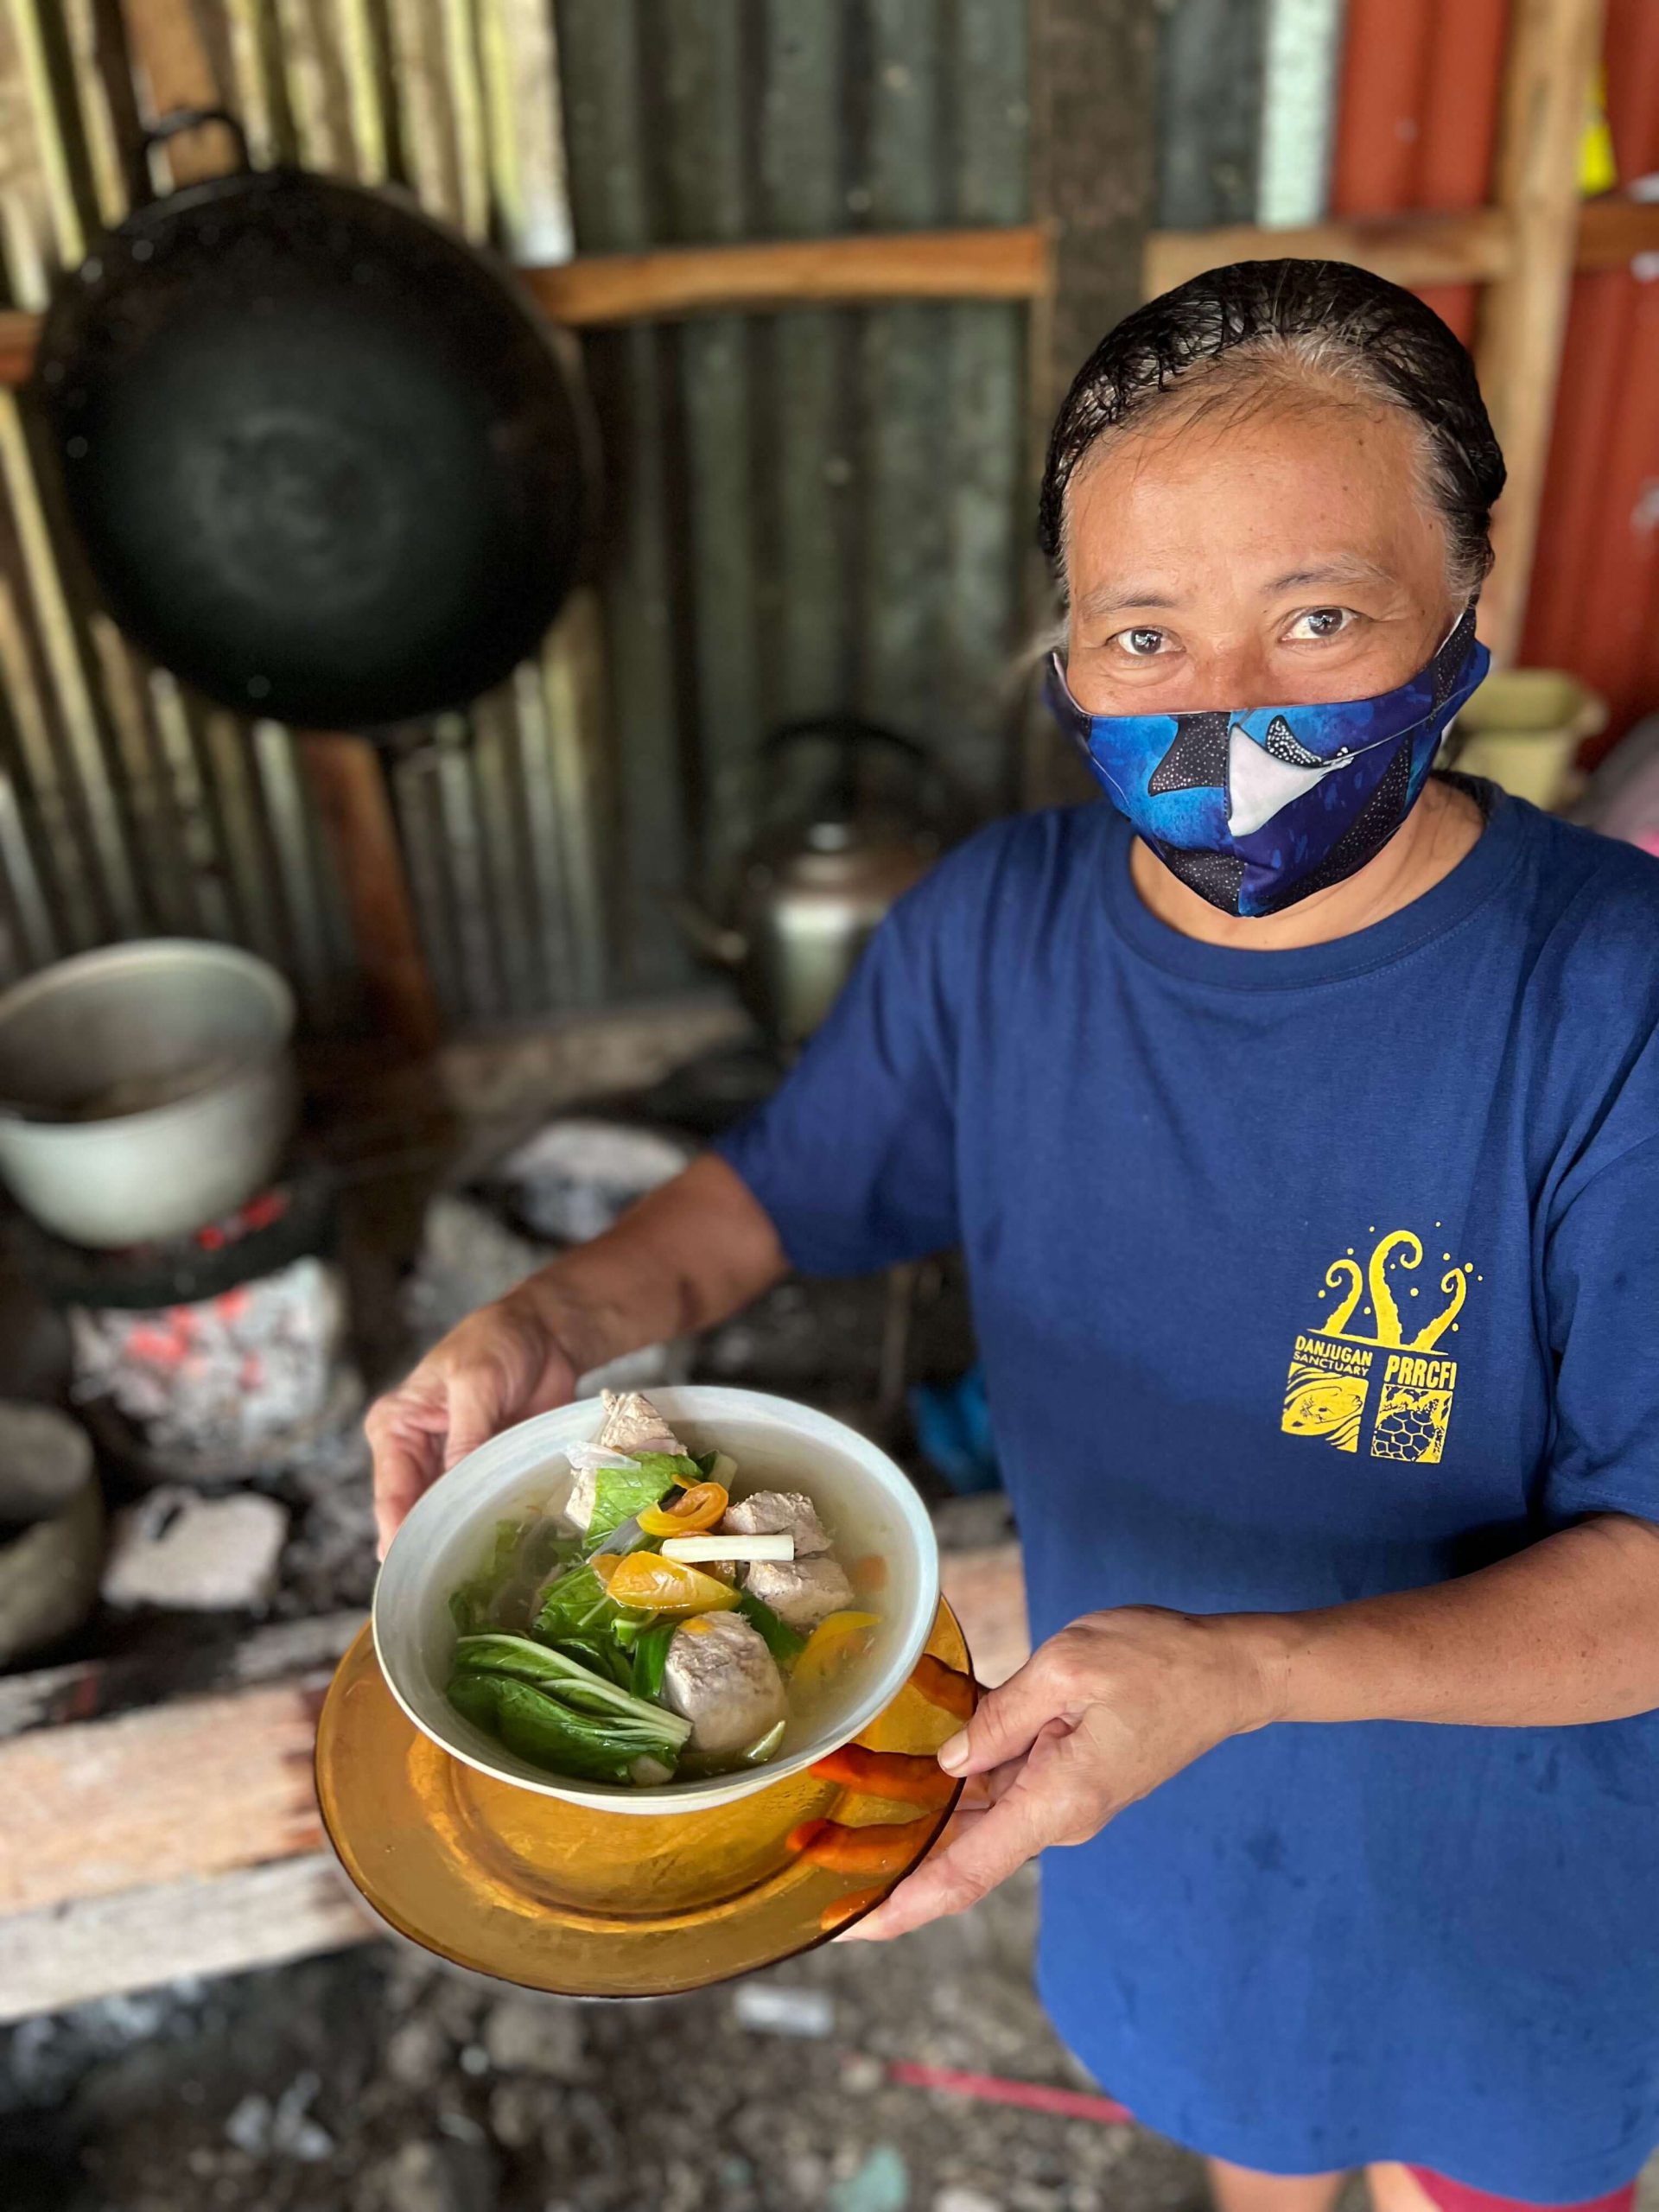 Daday, Danjugan island’s chef, shows off one of her delicacies, a traditional Filipino soup called Tinola. Food on the island is always locally sourced or produced